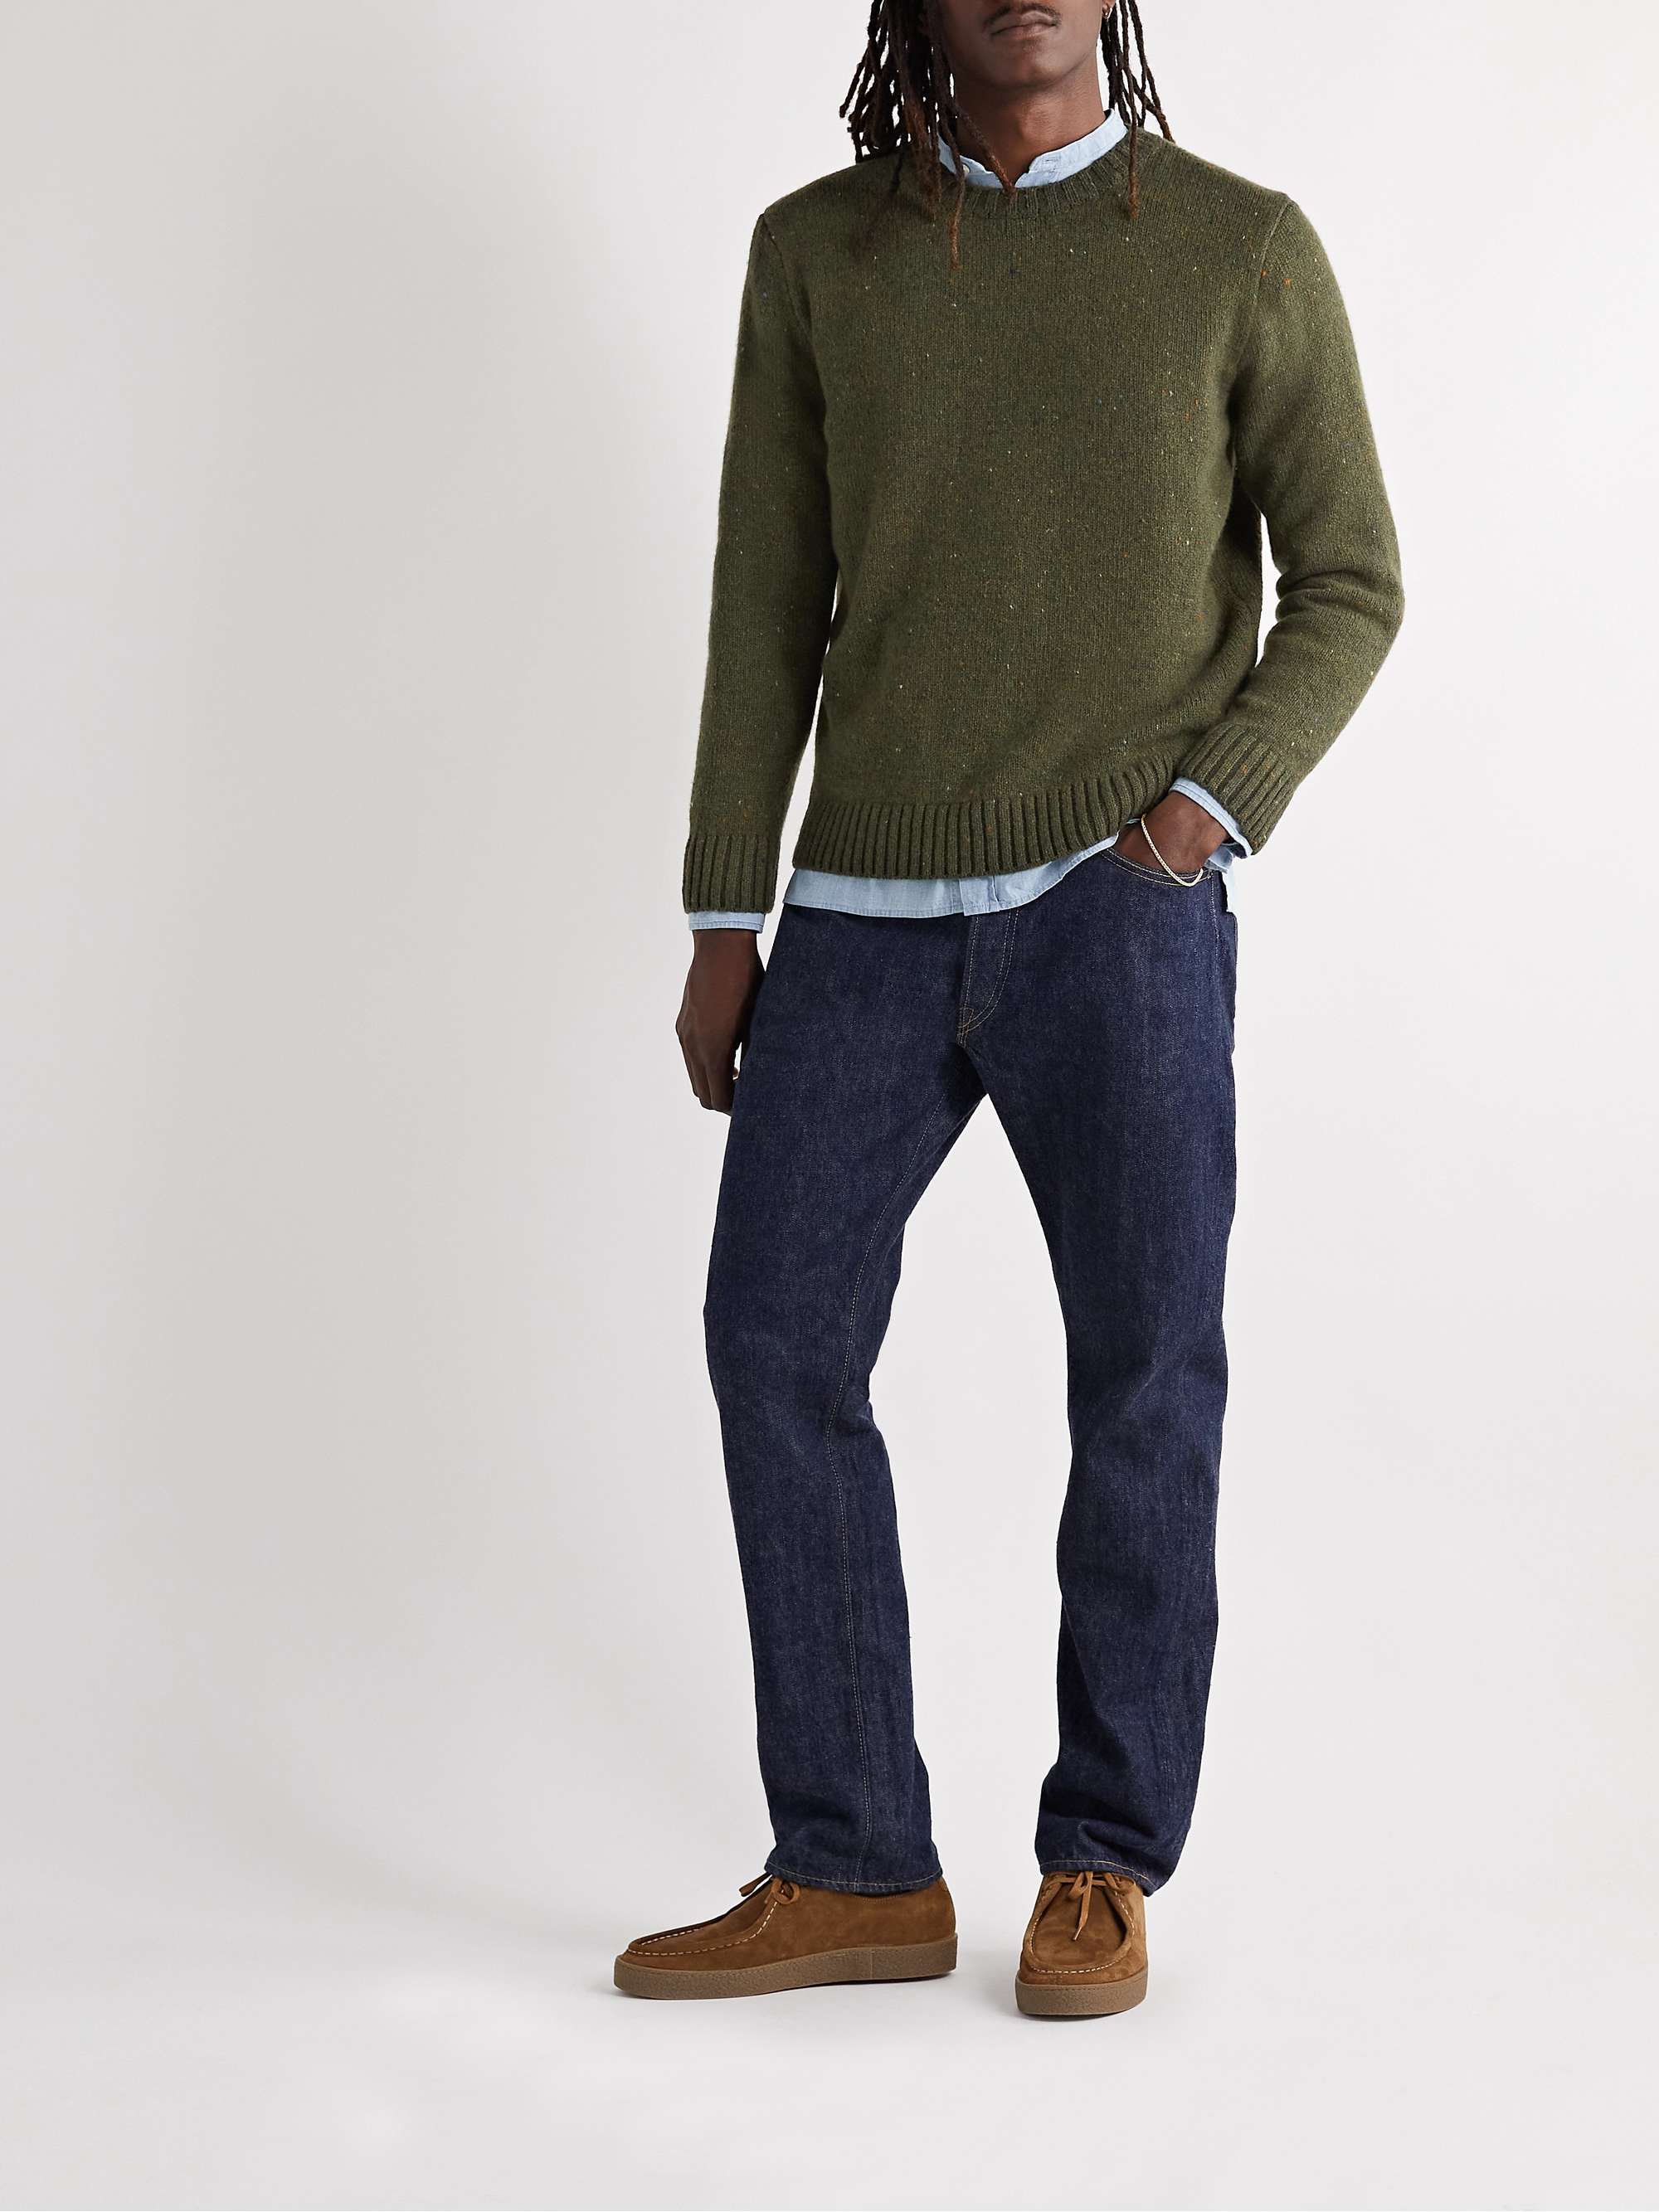 INIS MEÁIN Donegal Merino Wool and Cashmere-Blend Sweater | MR PORTER